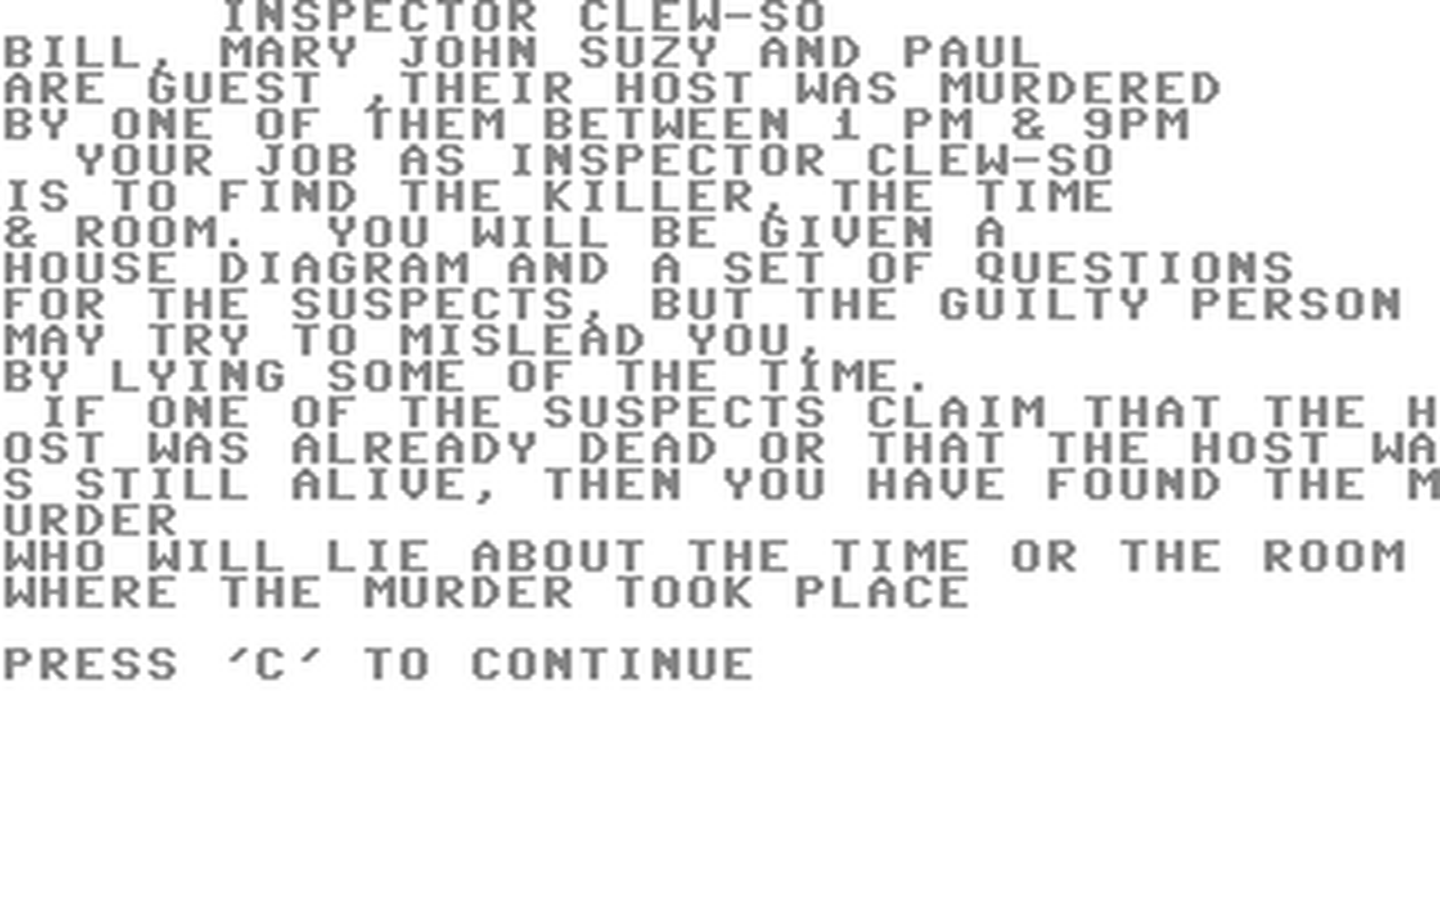 C64 GameBase Inpsector_Clew-So 1979